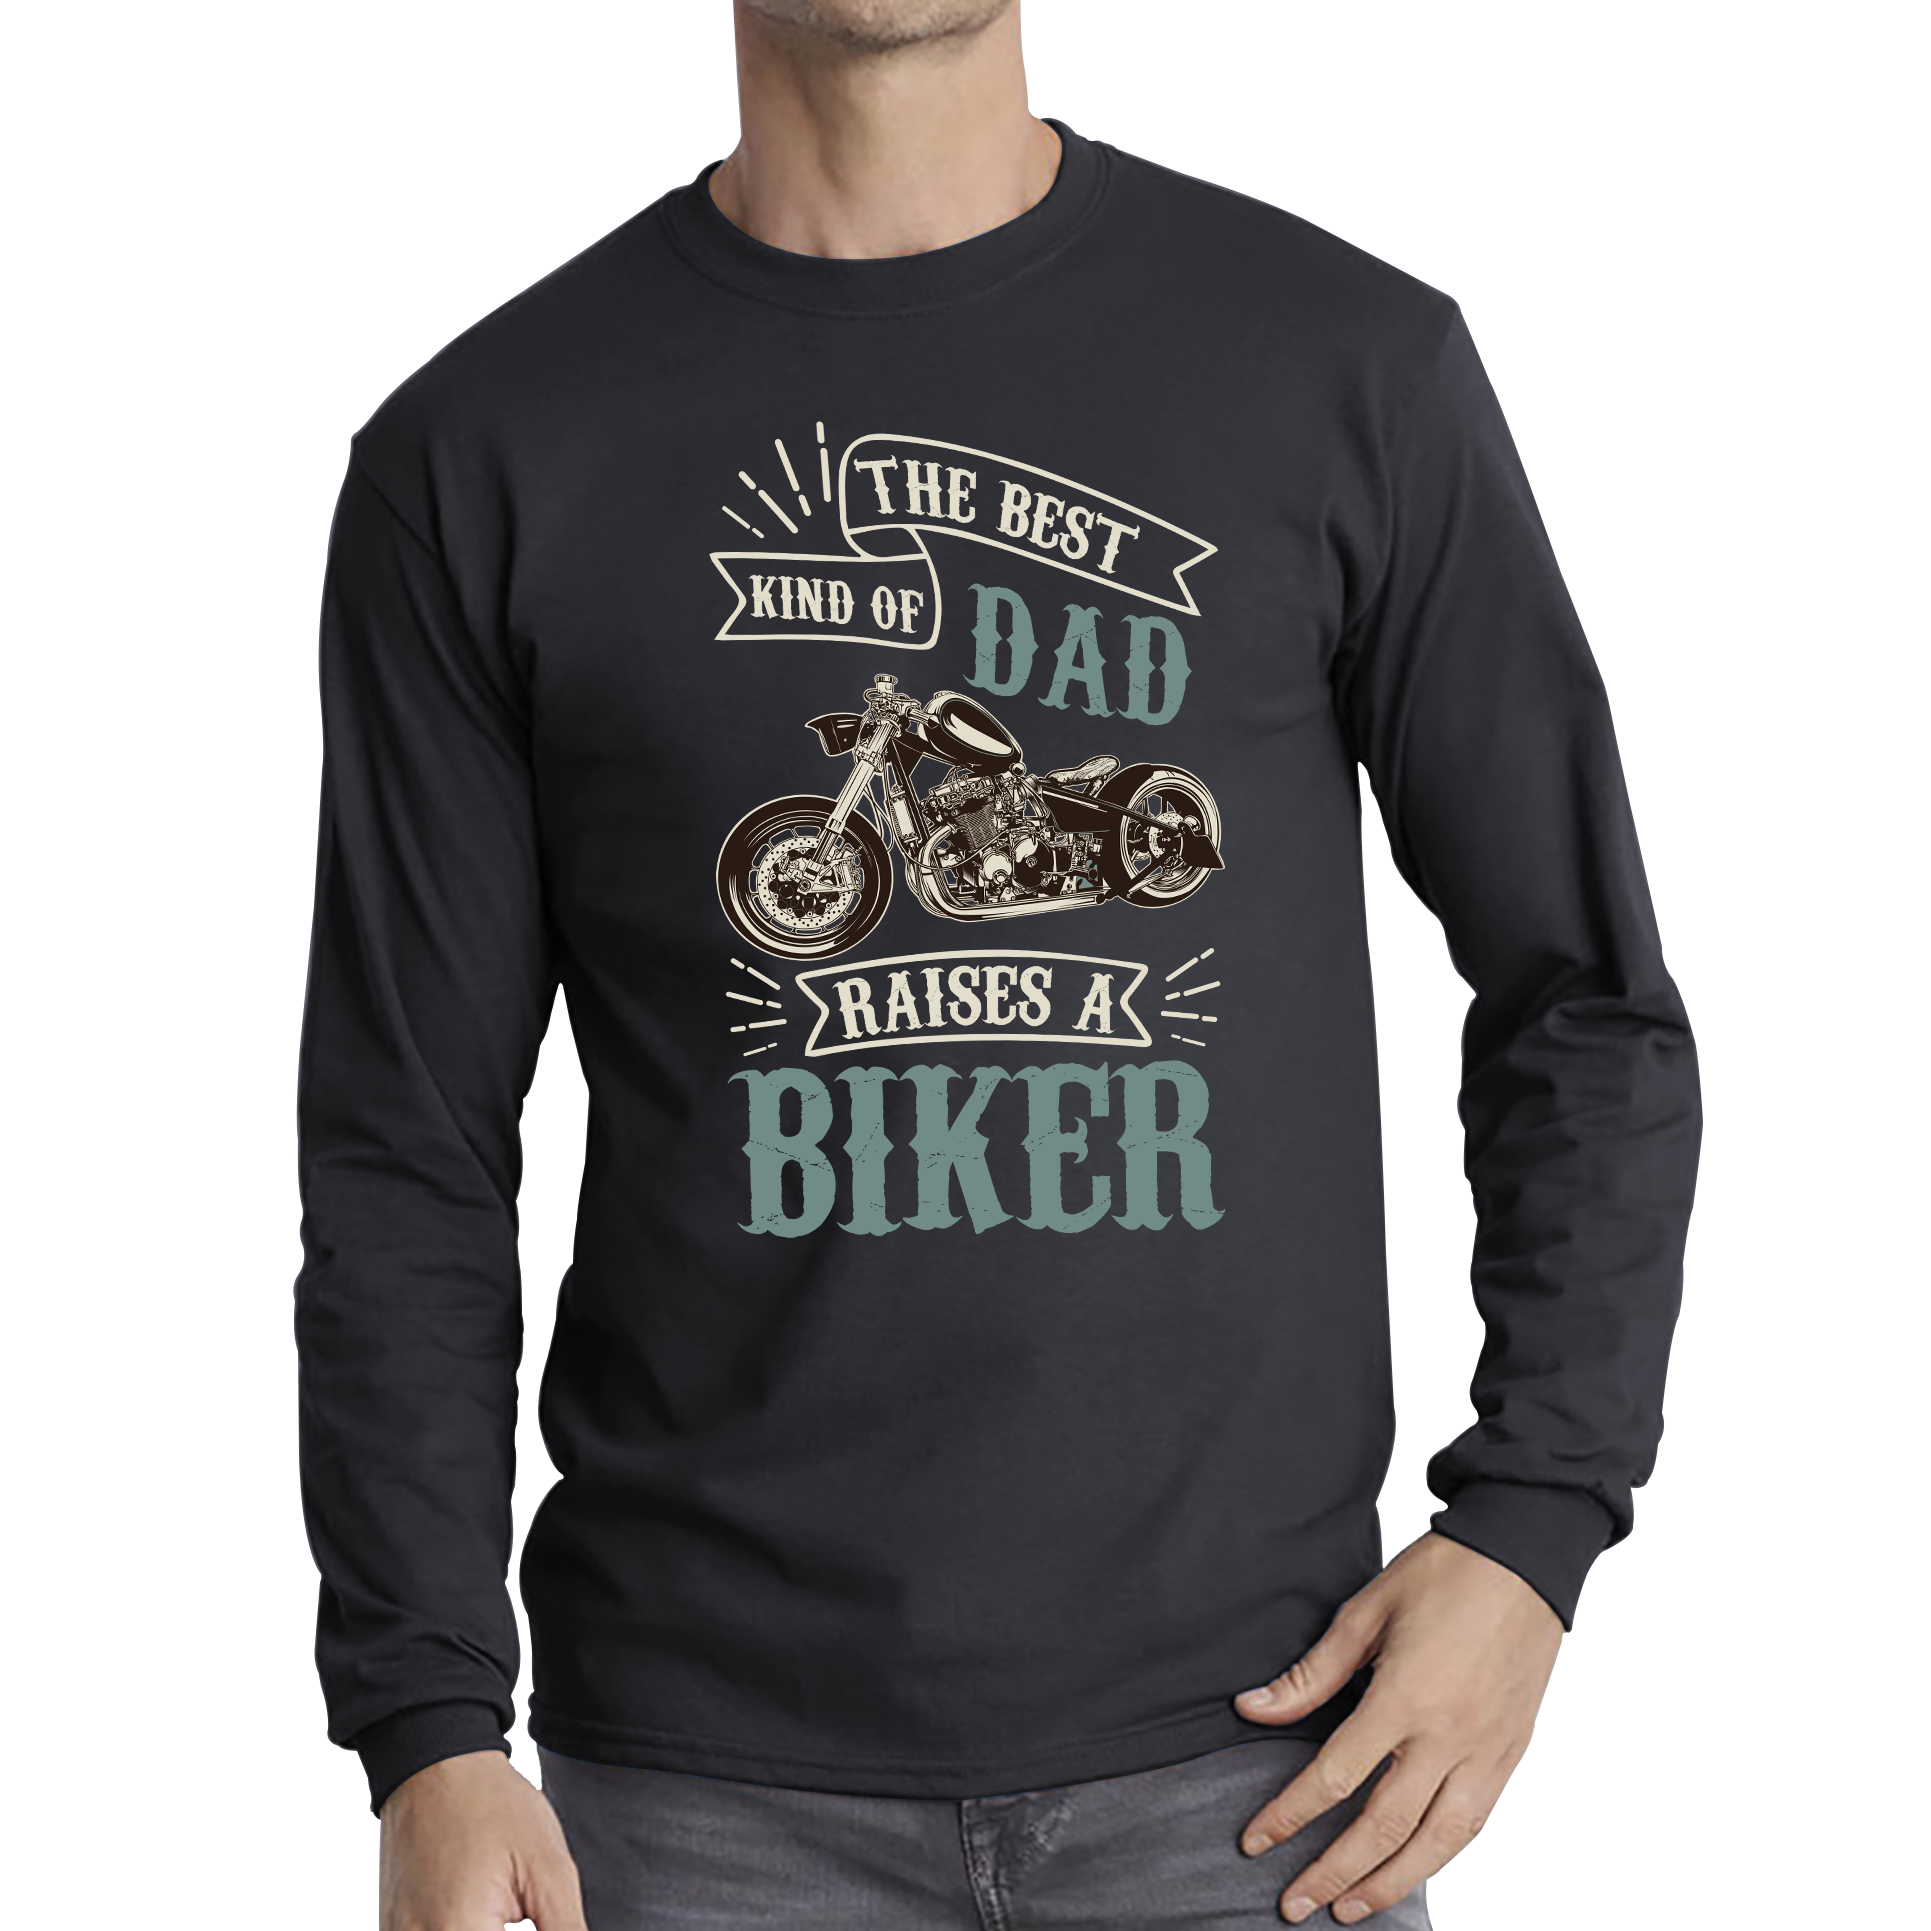 The Best Kind Of Dad Raises A Biker Shirt Father's Day Funny Bike Lover Racers Long Sleeve T Shirt